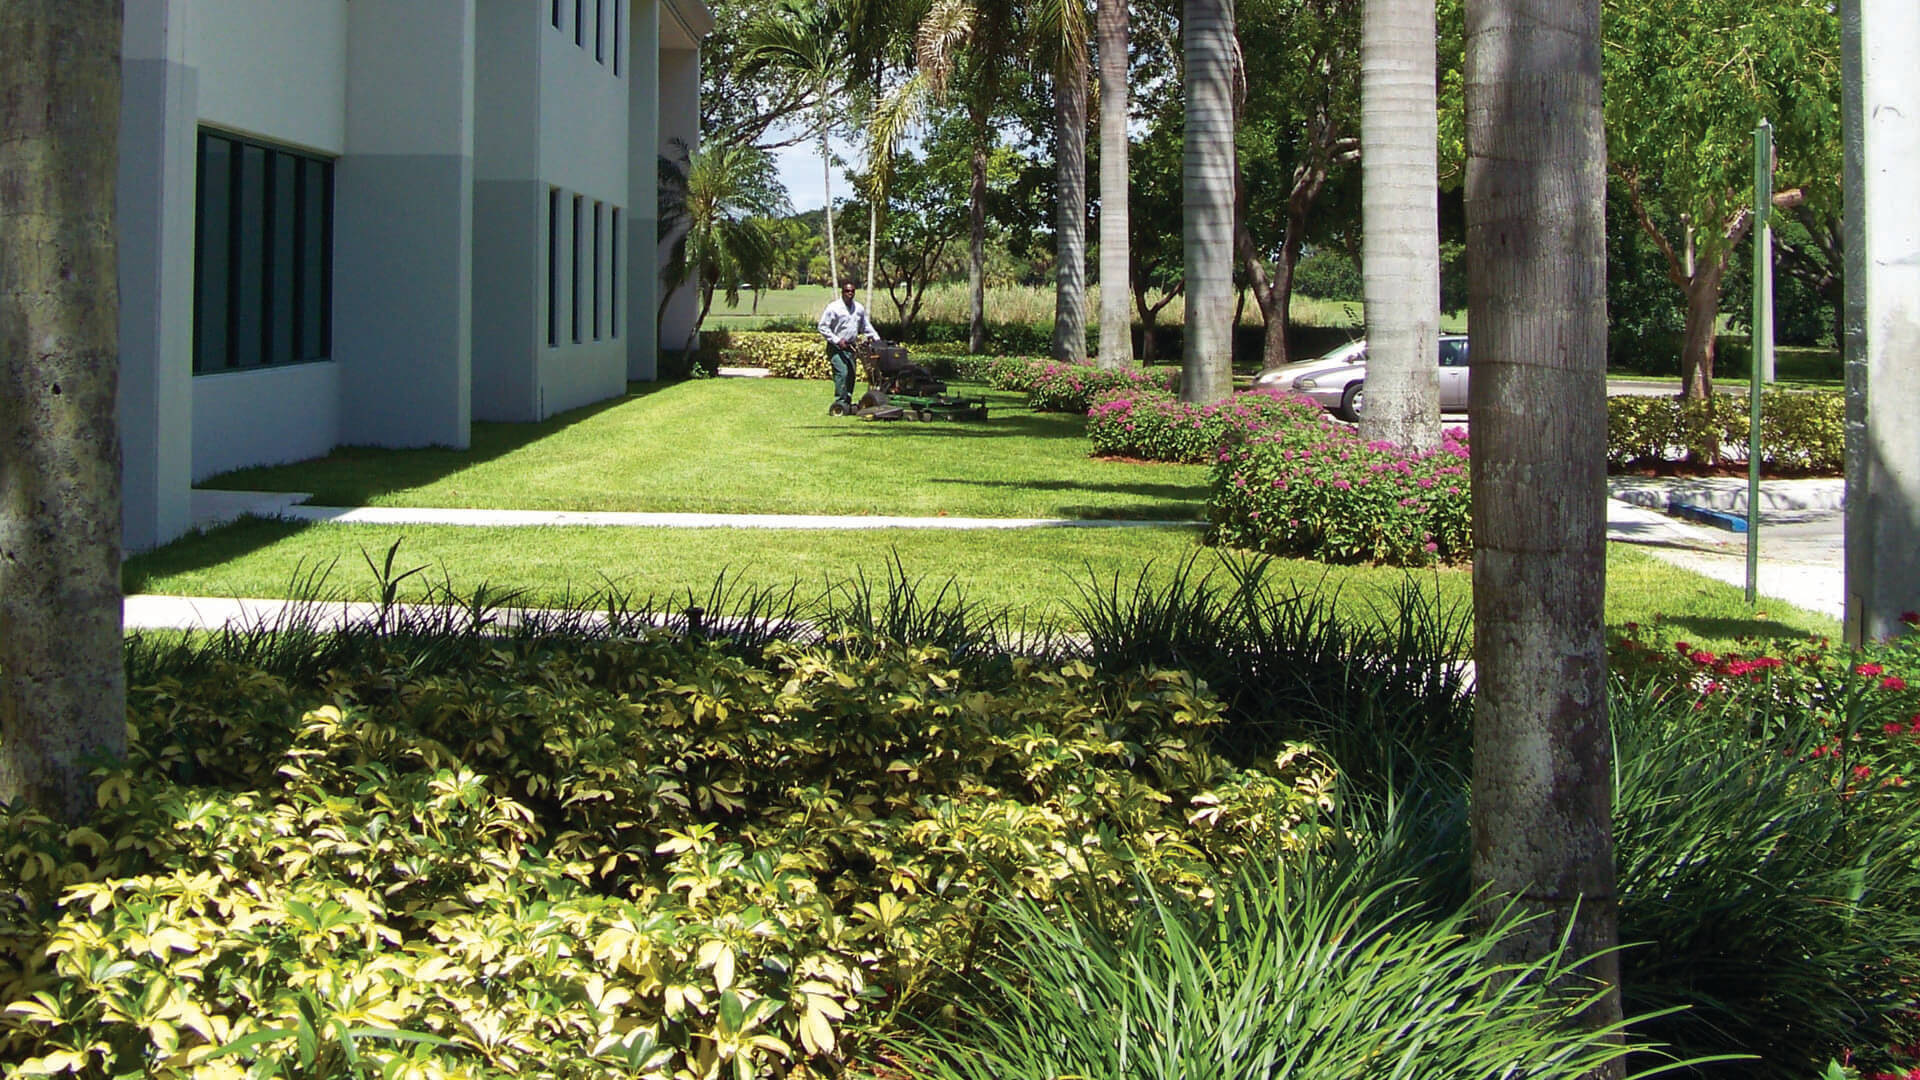 Grounds maintenance being performed for condo building in Davie, FL by BTS Land Services Corp.